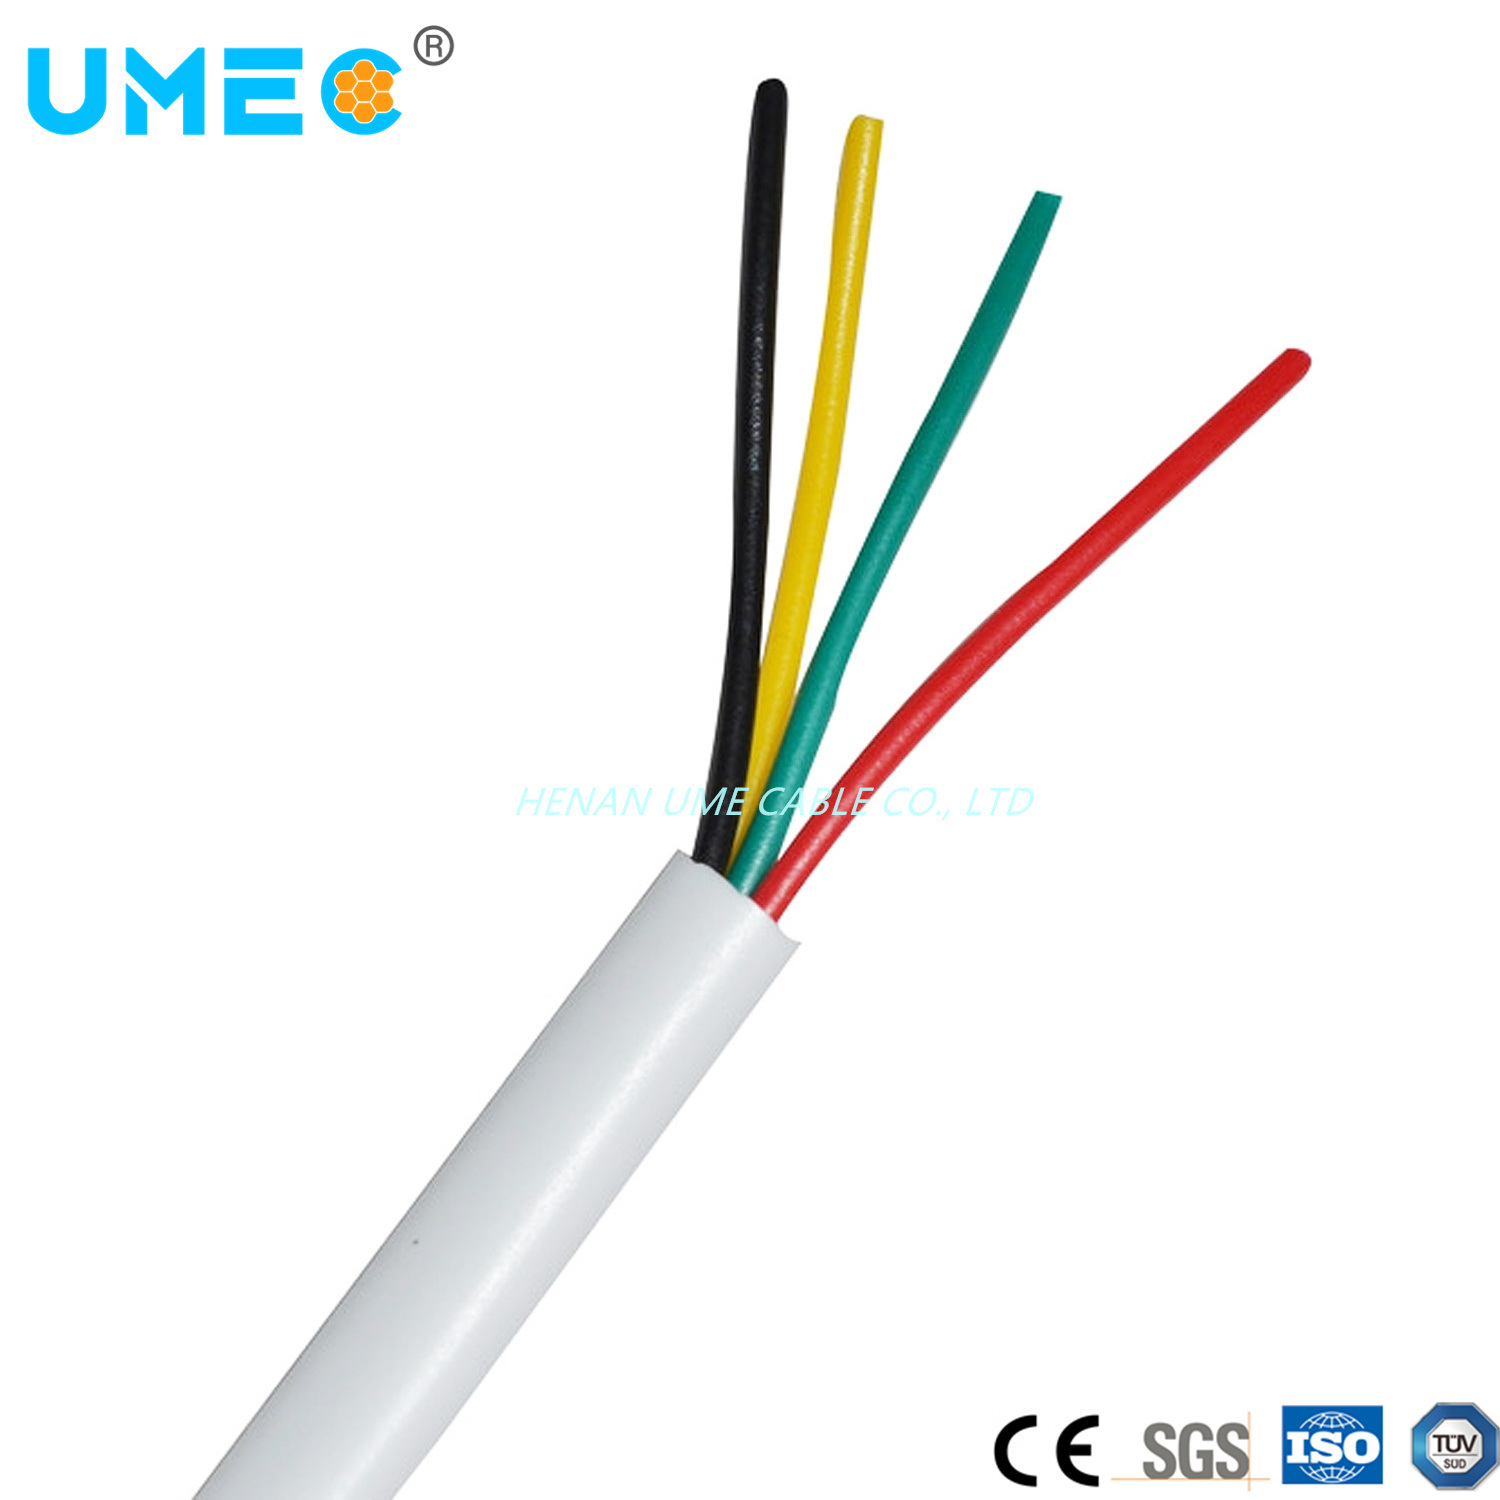 Electrical Copper Wire PVC Insulated PVC Sheathed Flexble Wire H03vvf H05vvf